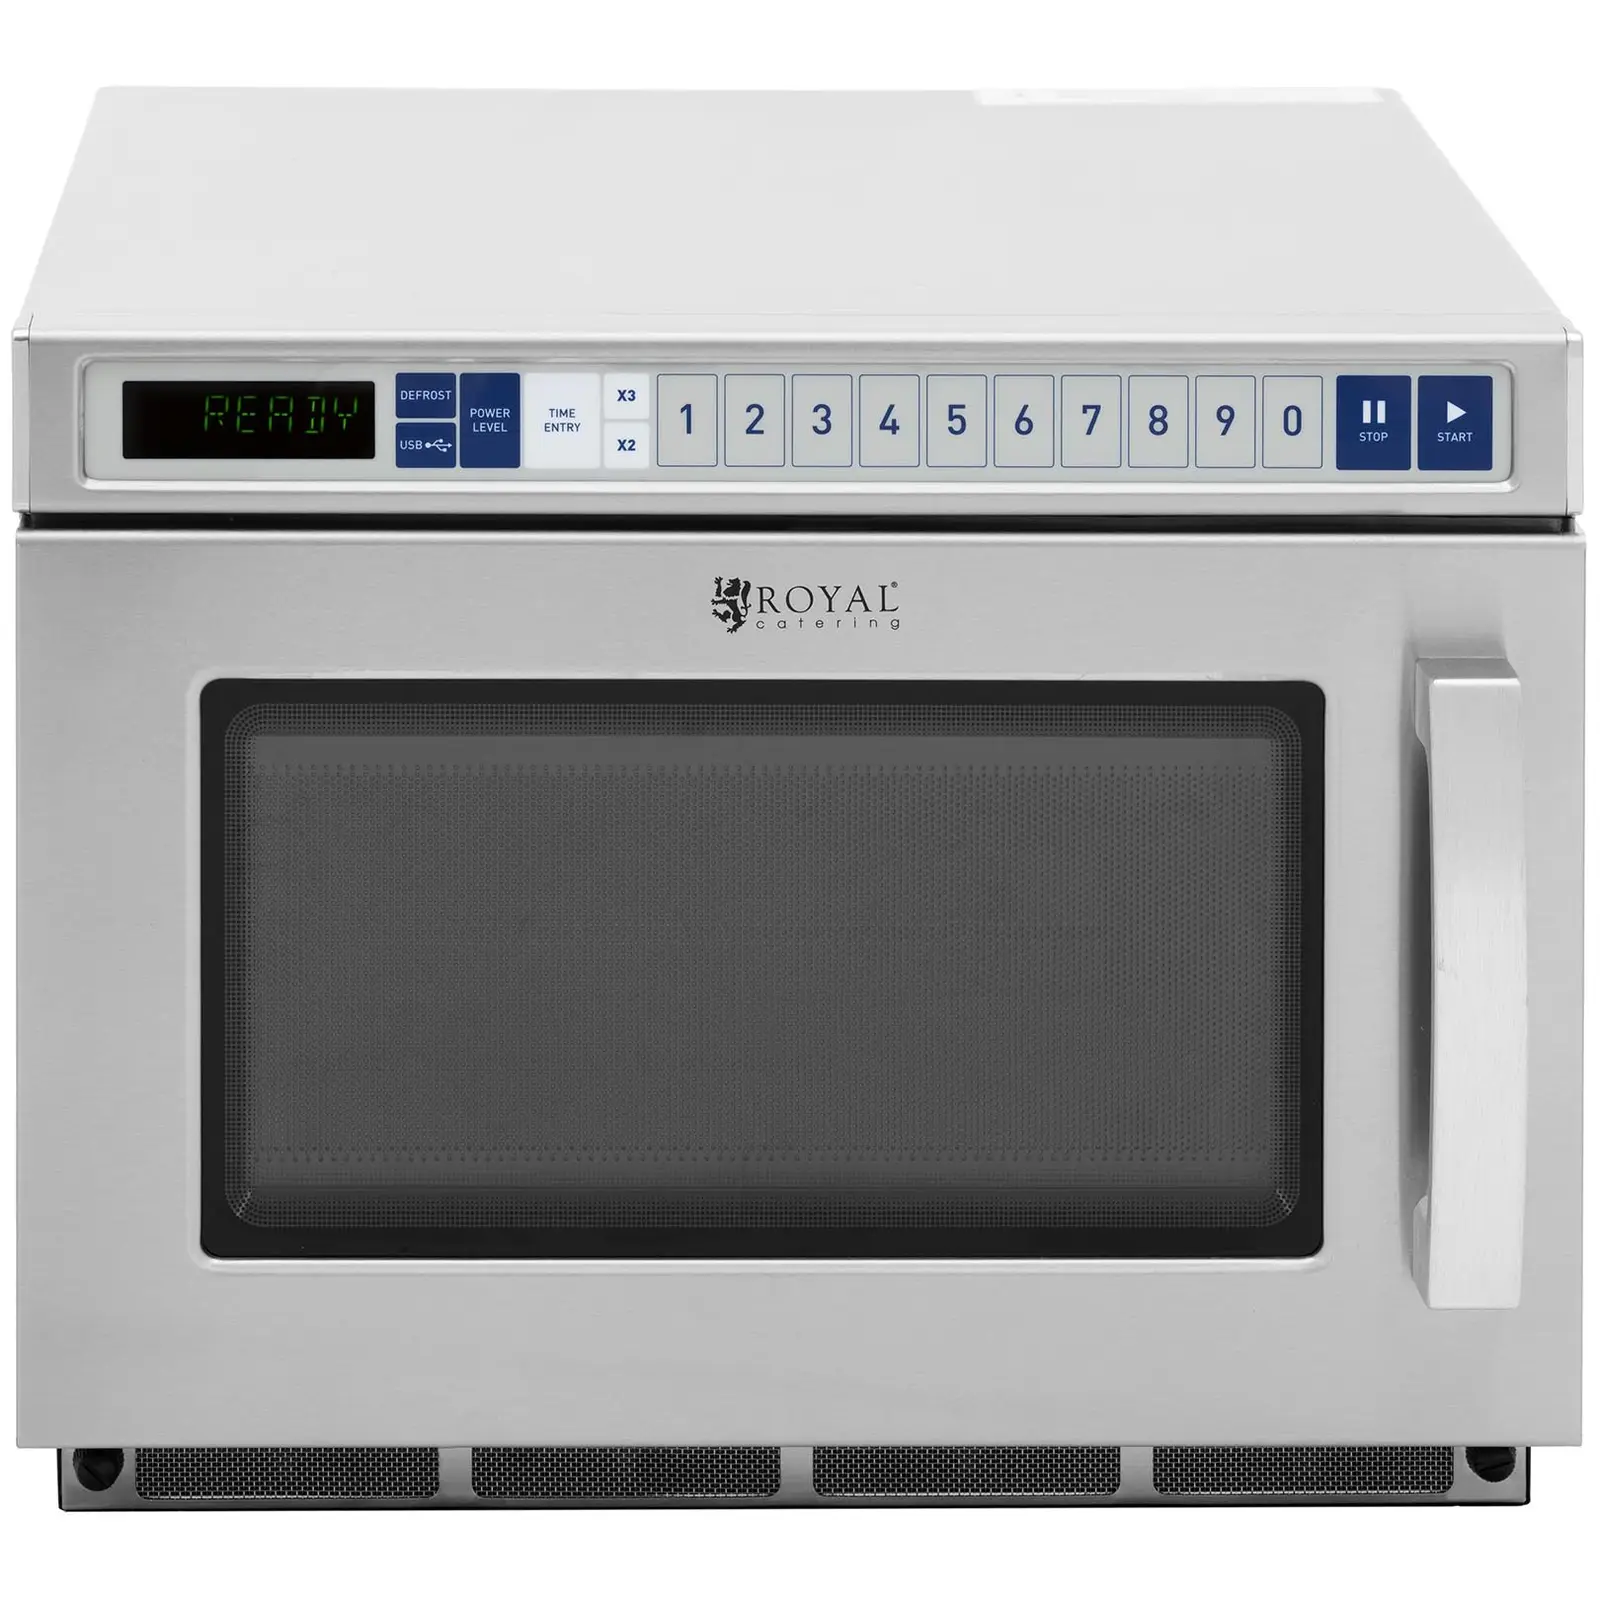 Microwave - 3000 W - 17 L - Royal Catering - 2